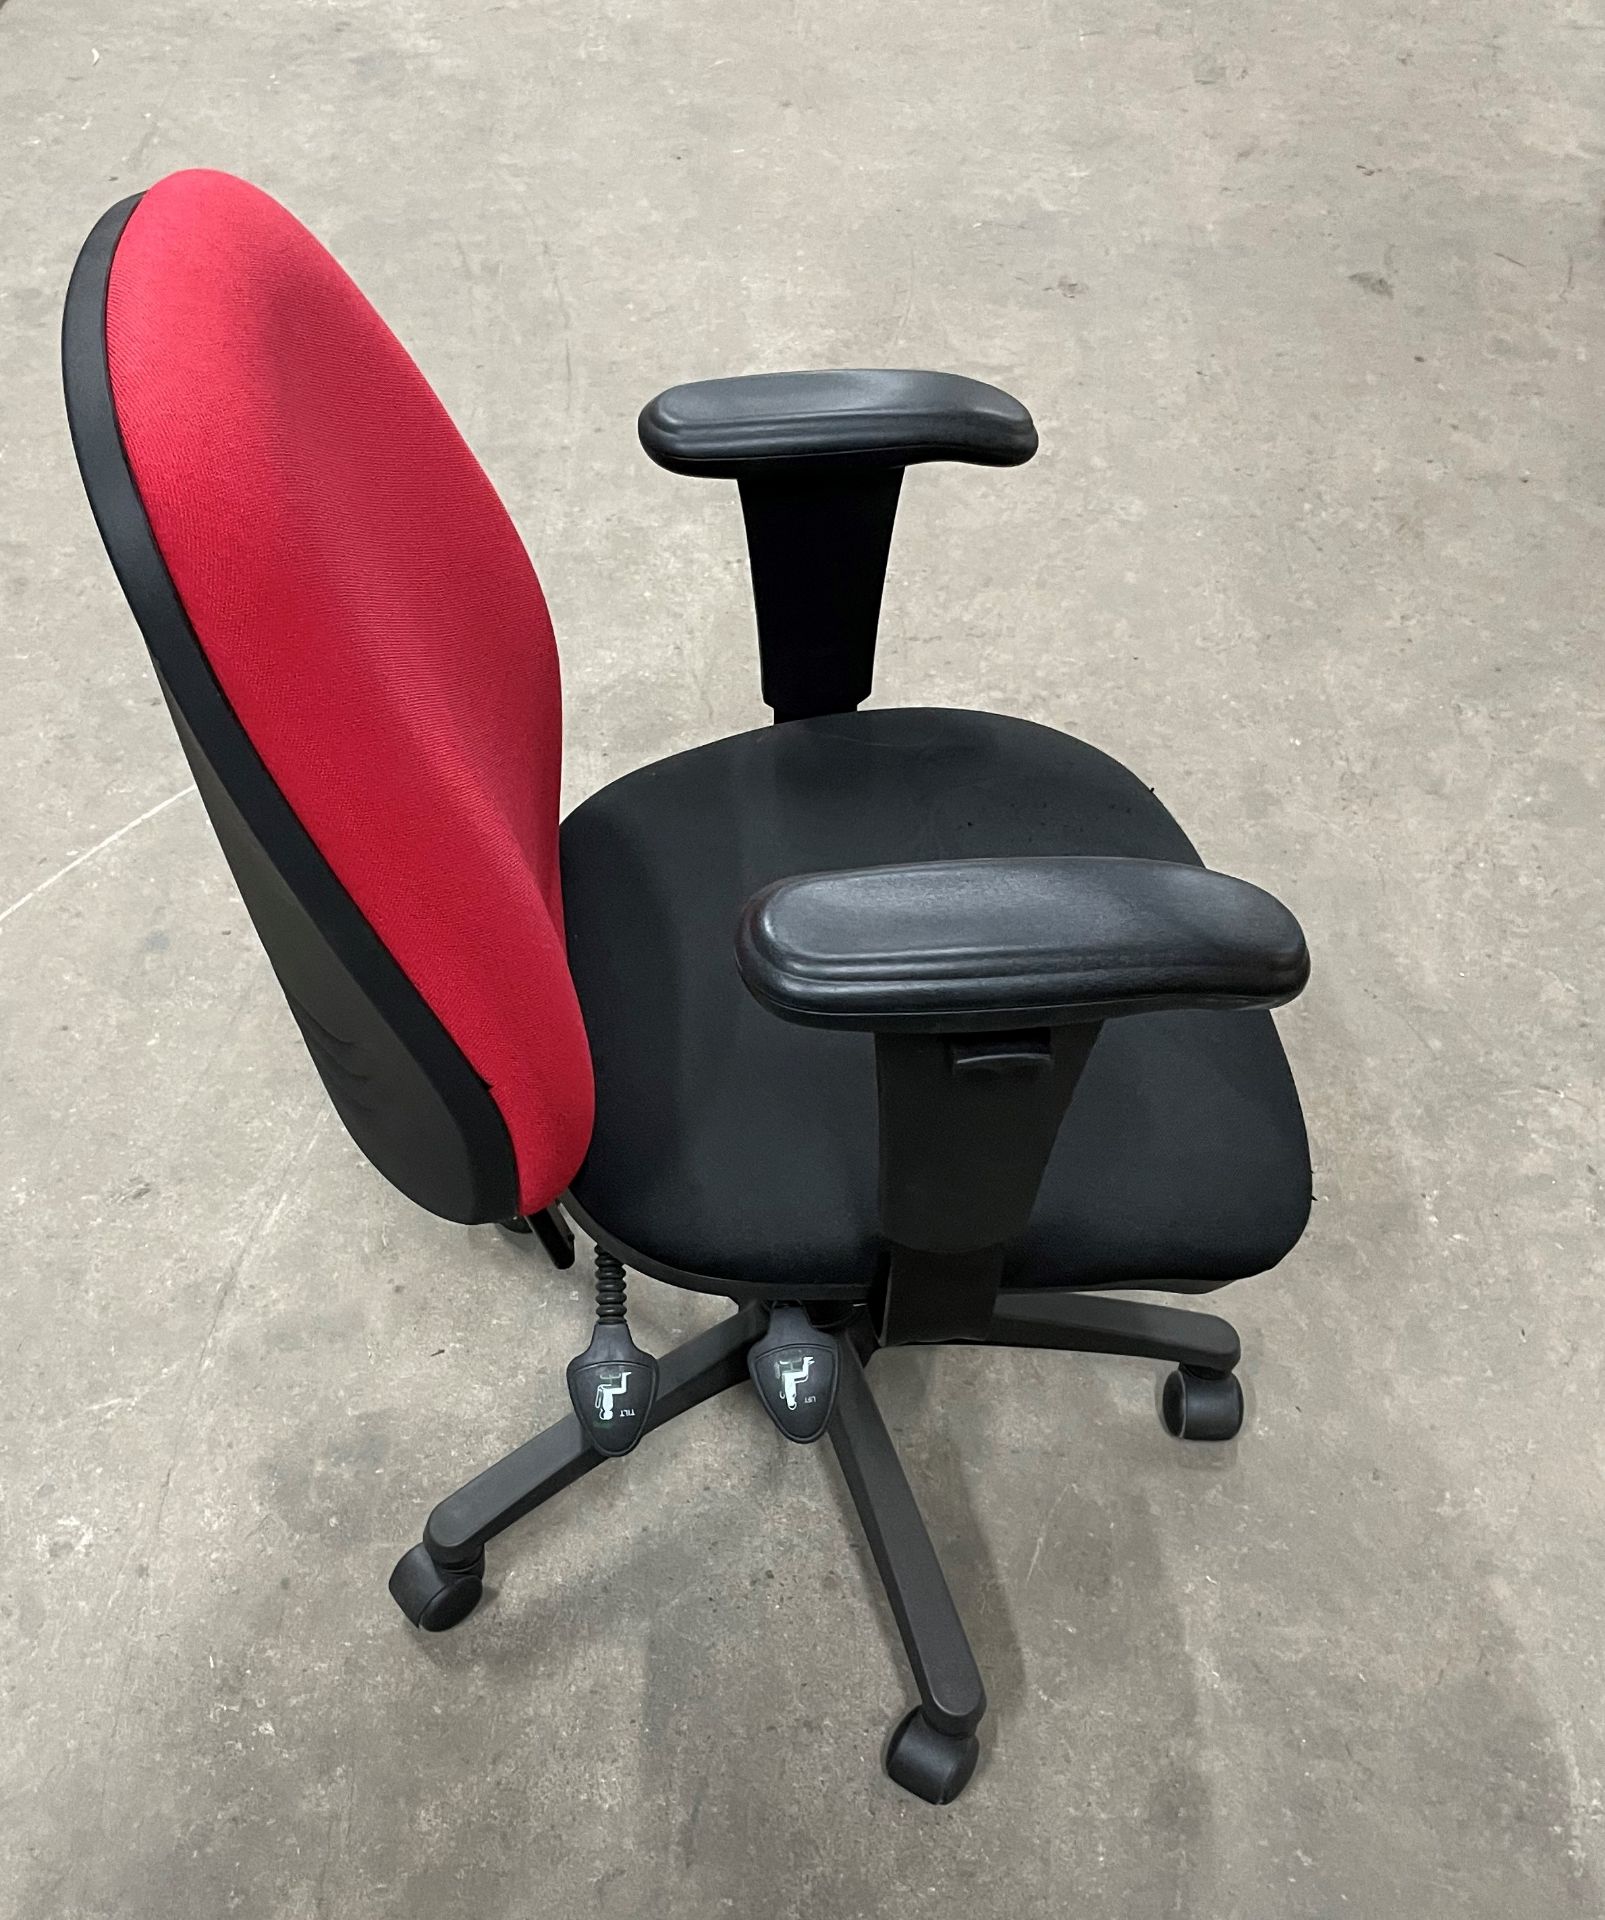 5 x Fabric Operator Chairs w/Arm Rests and Five Star Wheel Base - Image 2 of 4